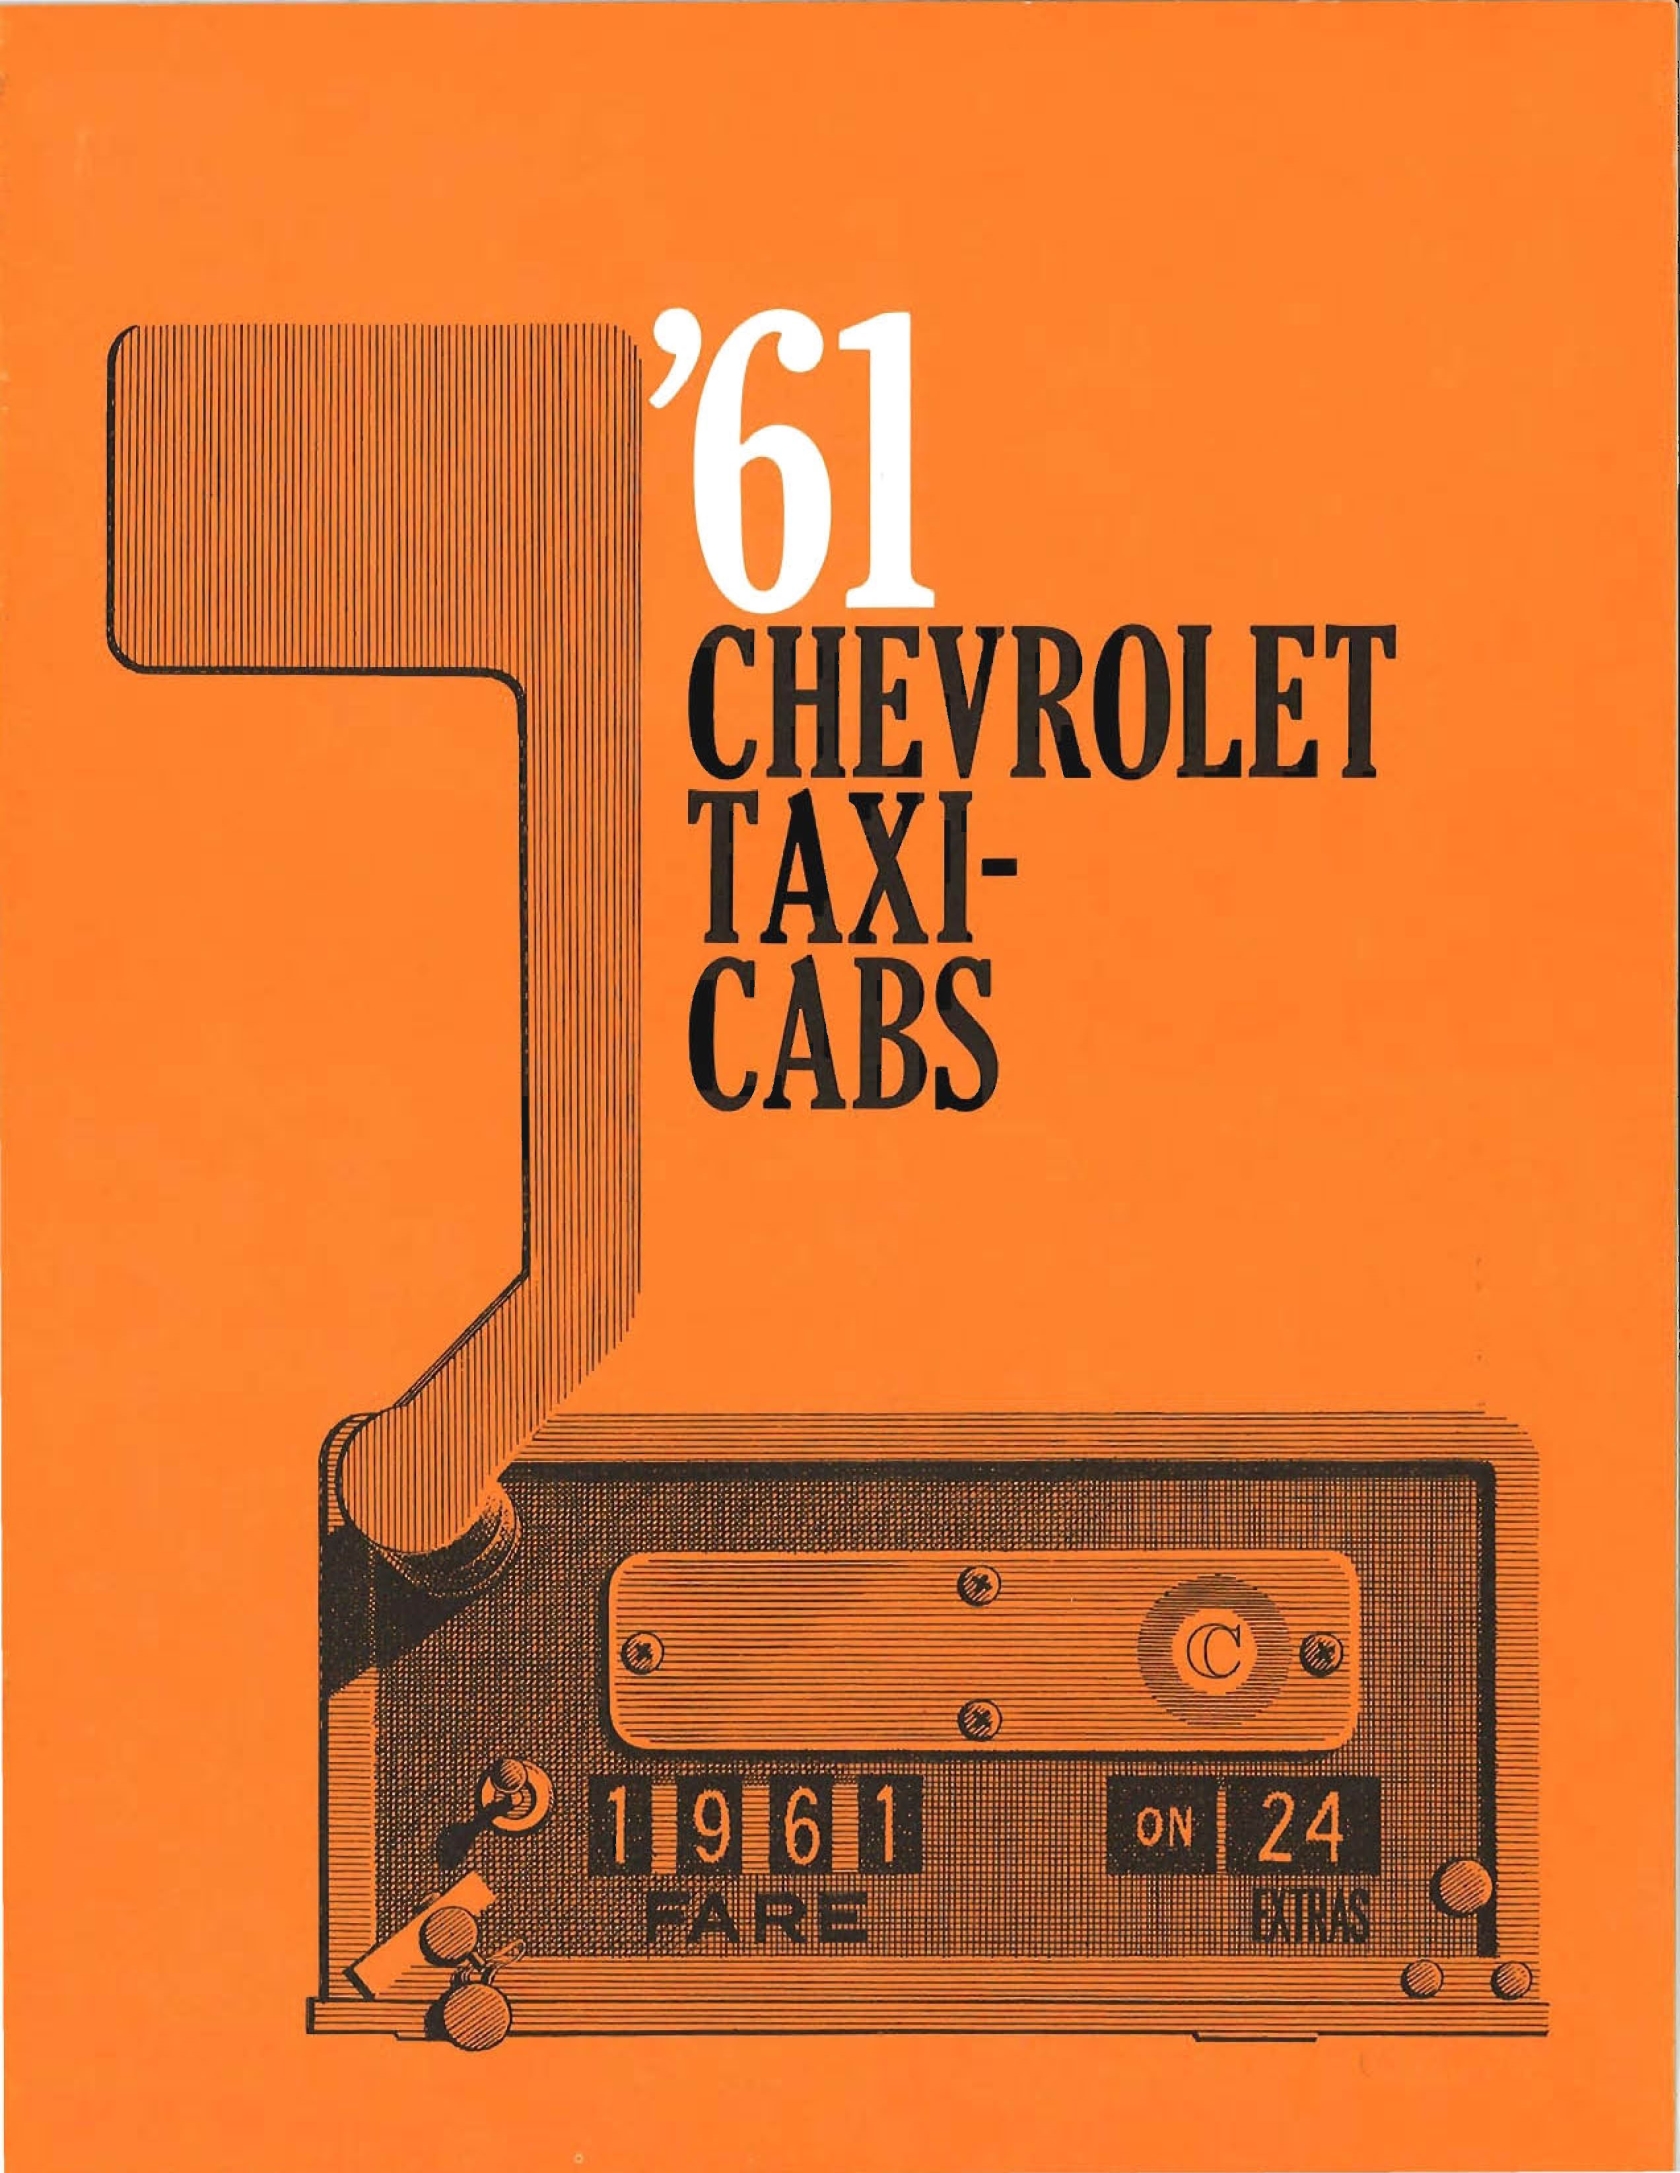 1961_Chevrolet_Taxi_Cabs-01